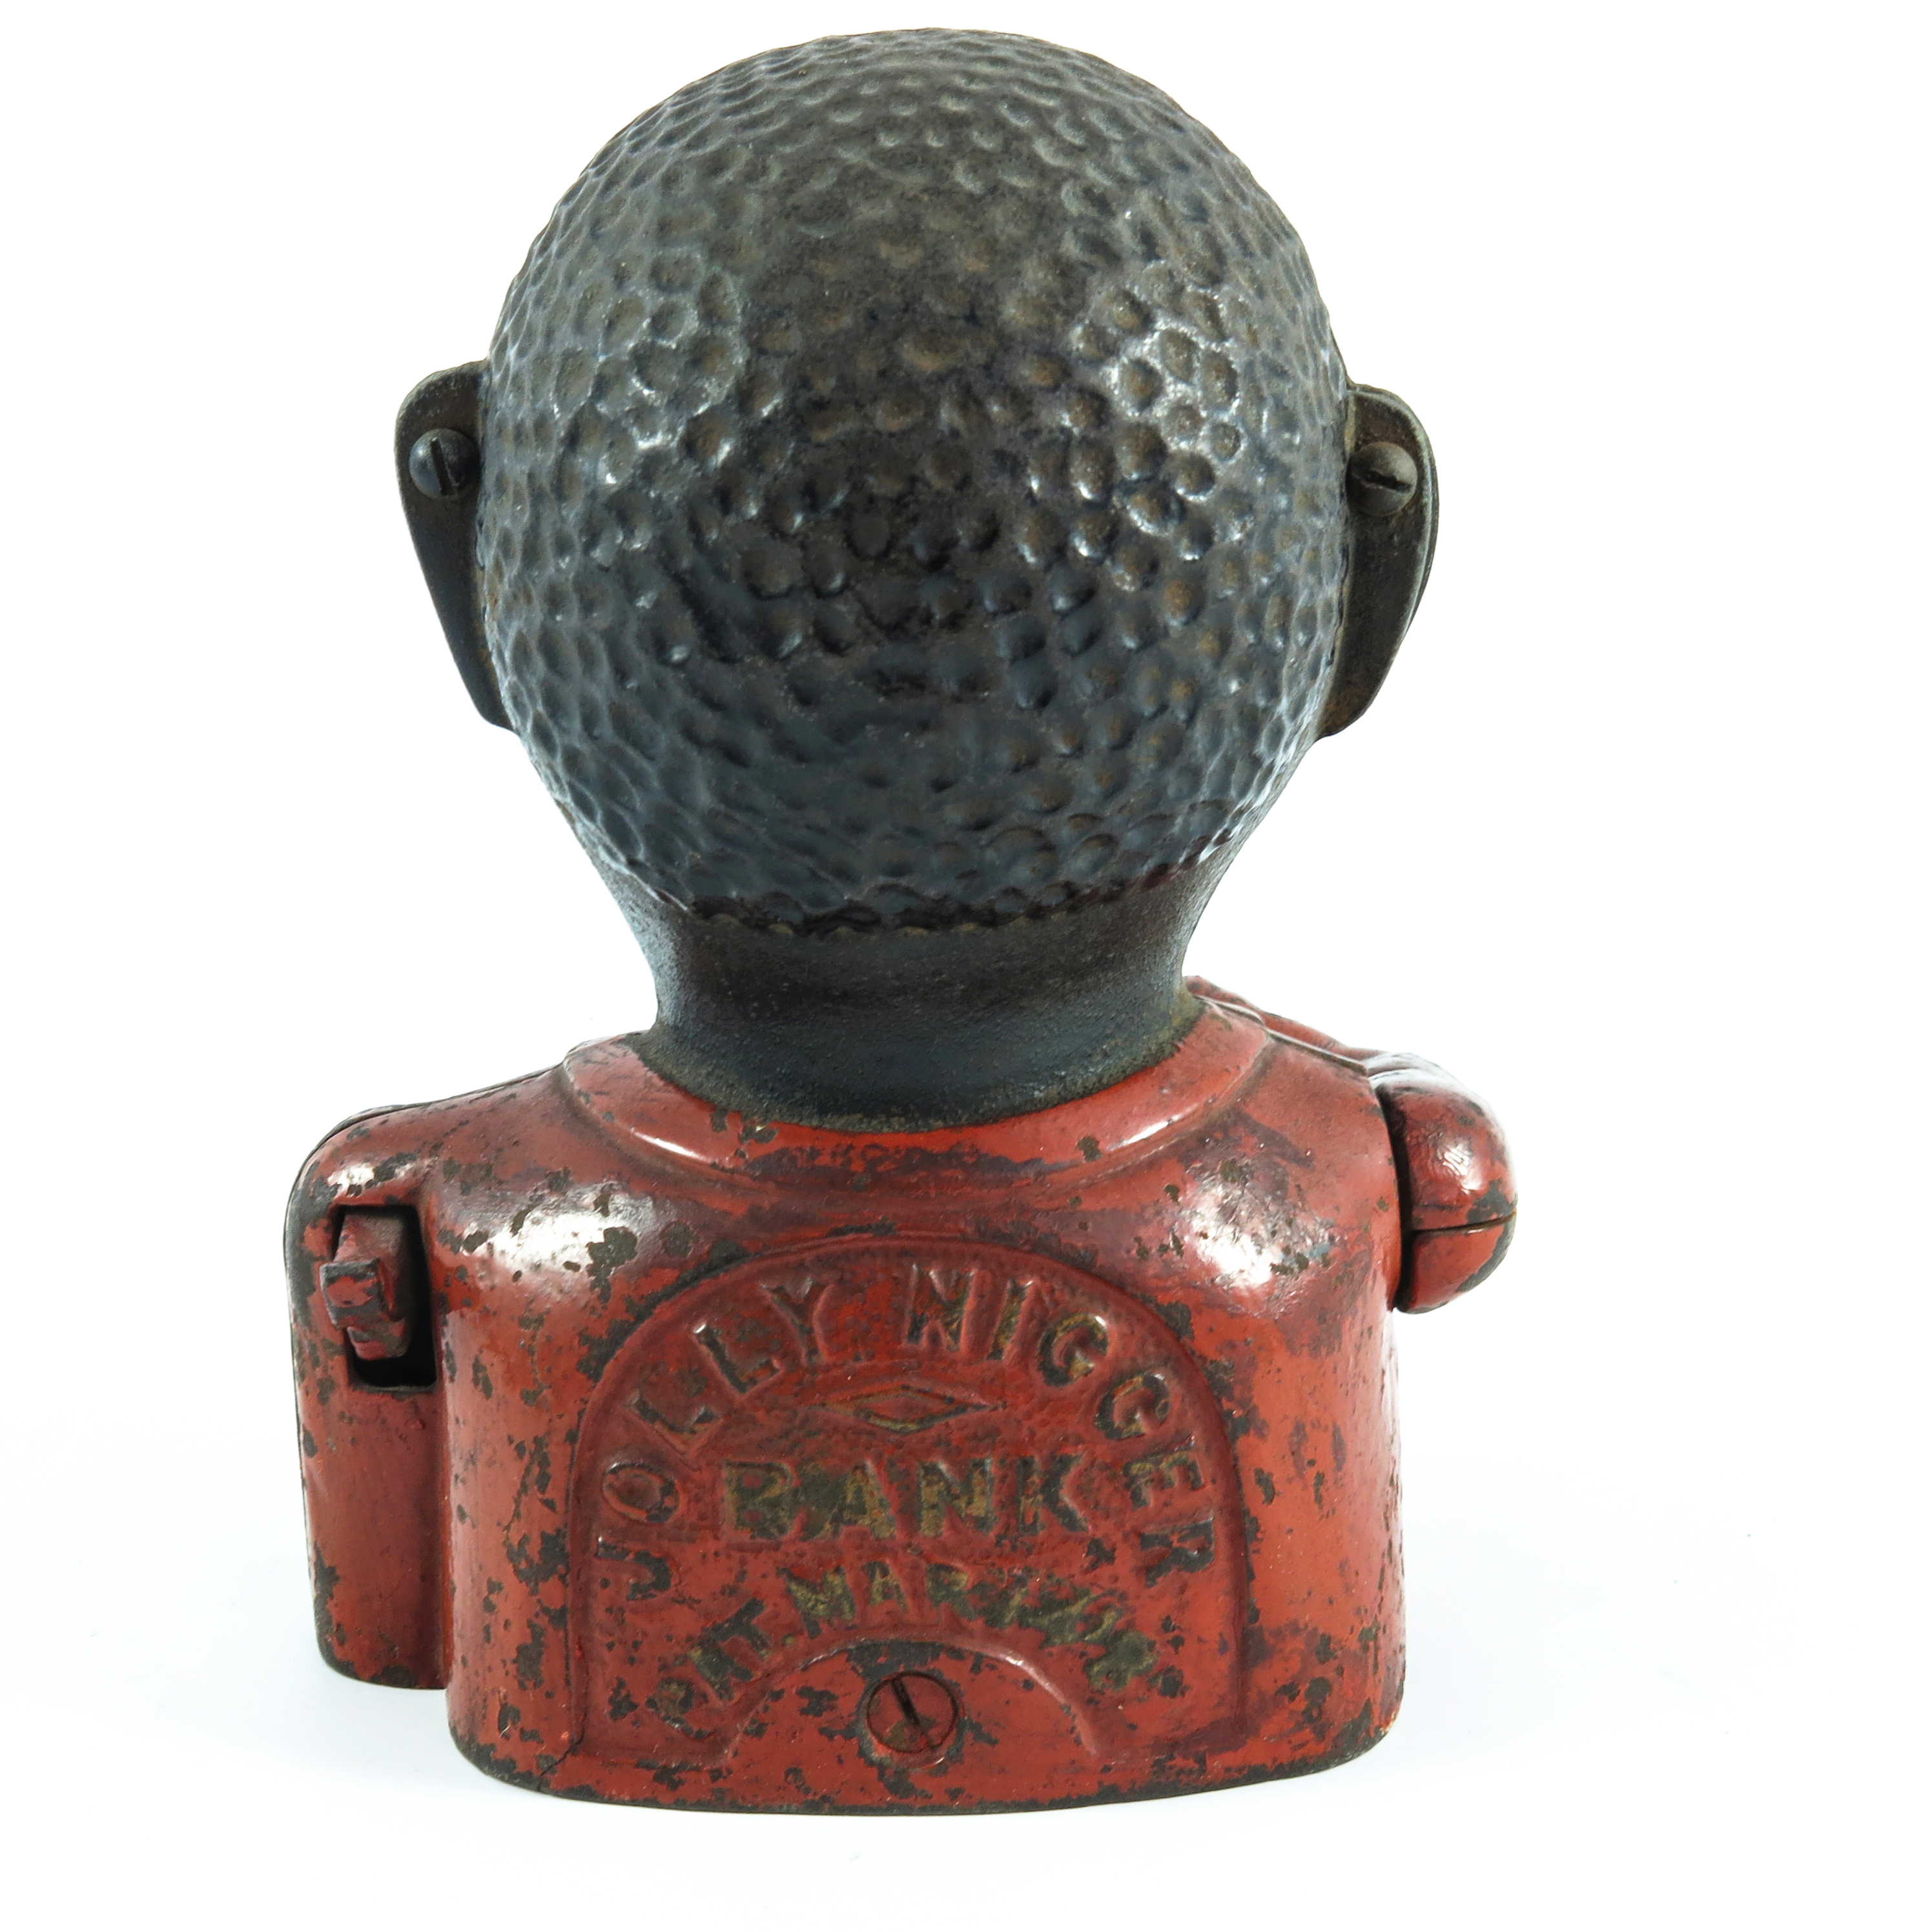 'JOLLY NIGGER' ORIGINAL CAST IRON MECHANICAL MONEY BOX, RED POLYCHROME DECORATION WITH YELLOW BOW - Image 4 of 6